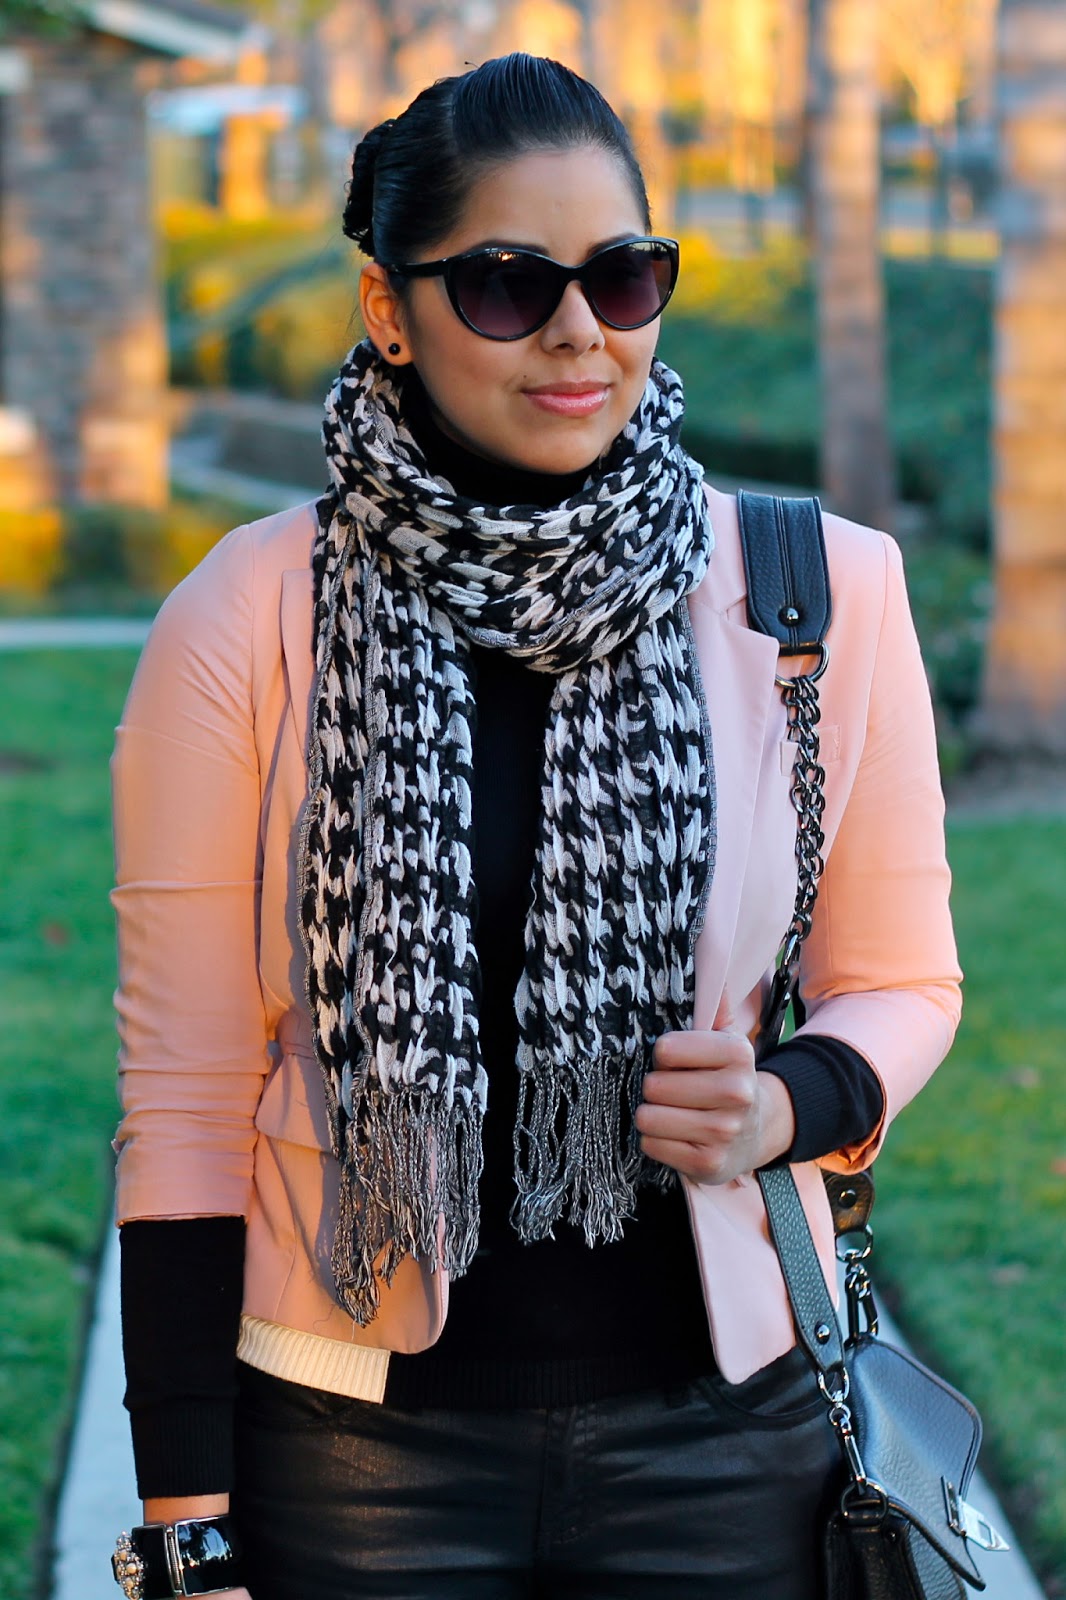 Rose, Houndstooth & Leather - Lil bits of Chic